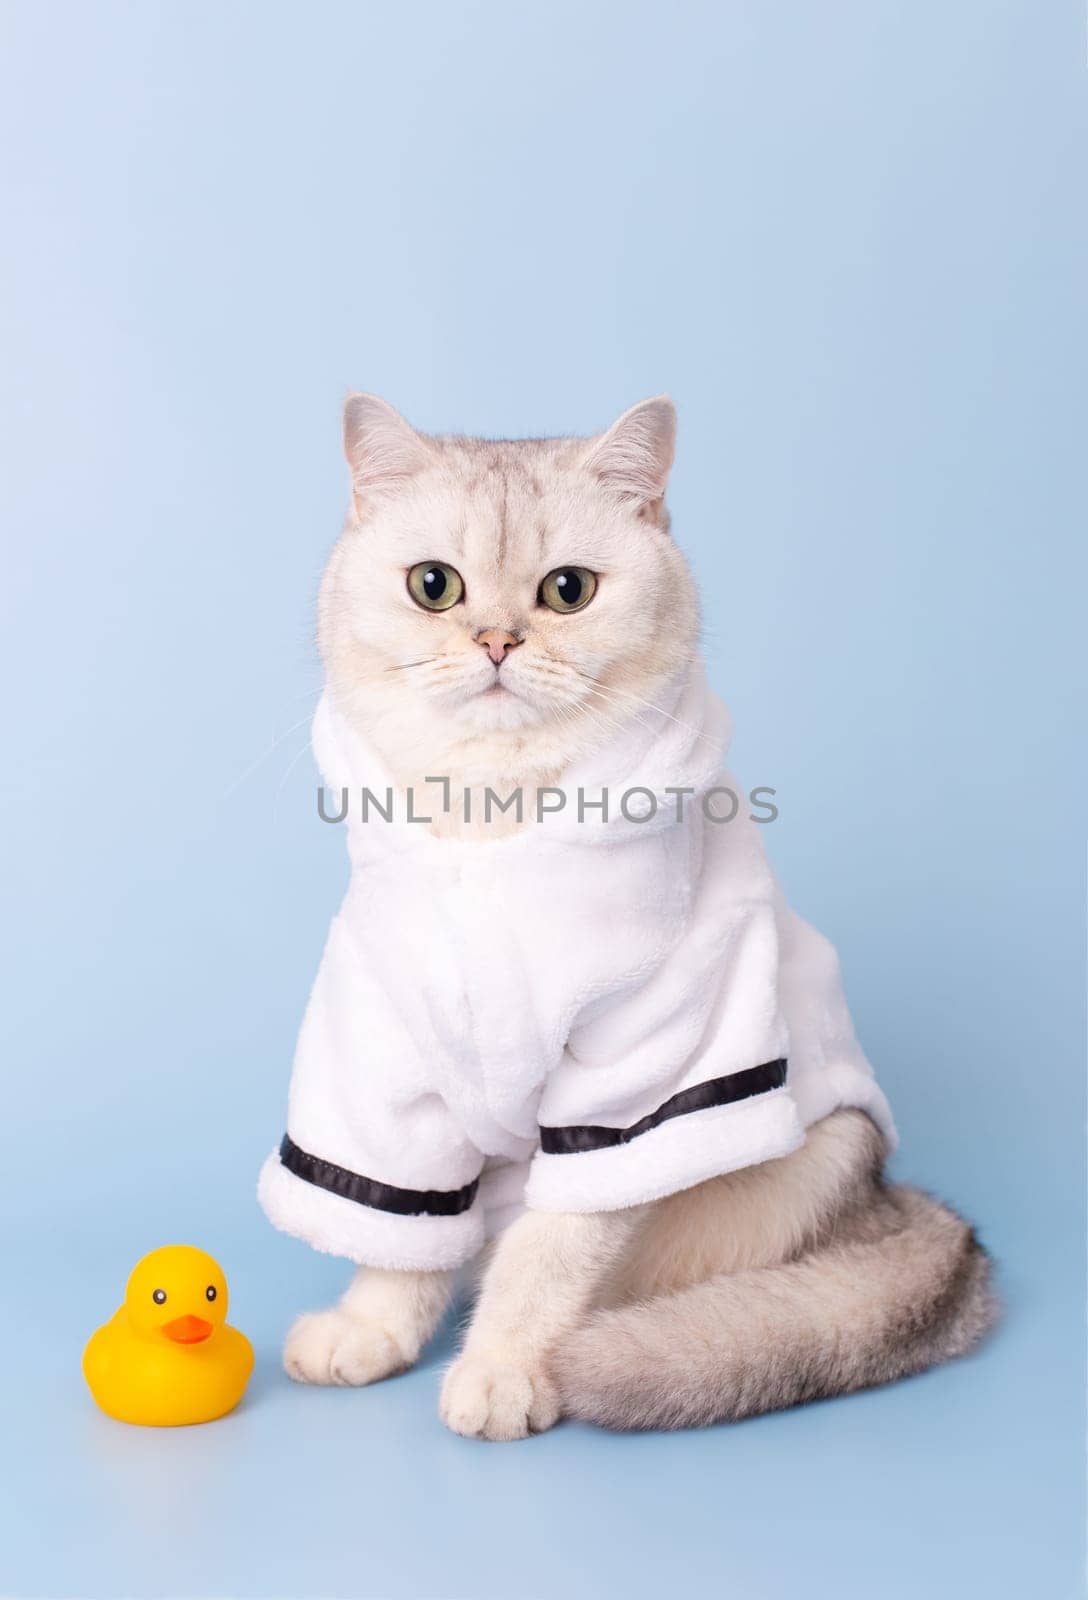 Pretty white cat is sitting in a white bathrobe, on a blue background, next to a yellow rubber duck, looking at camera. Vertical. Copy space